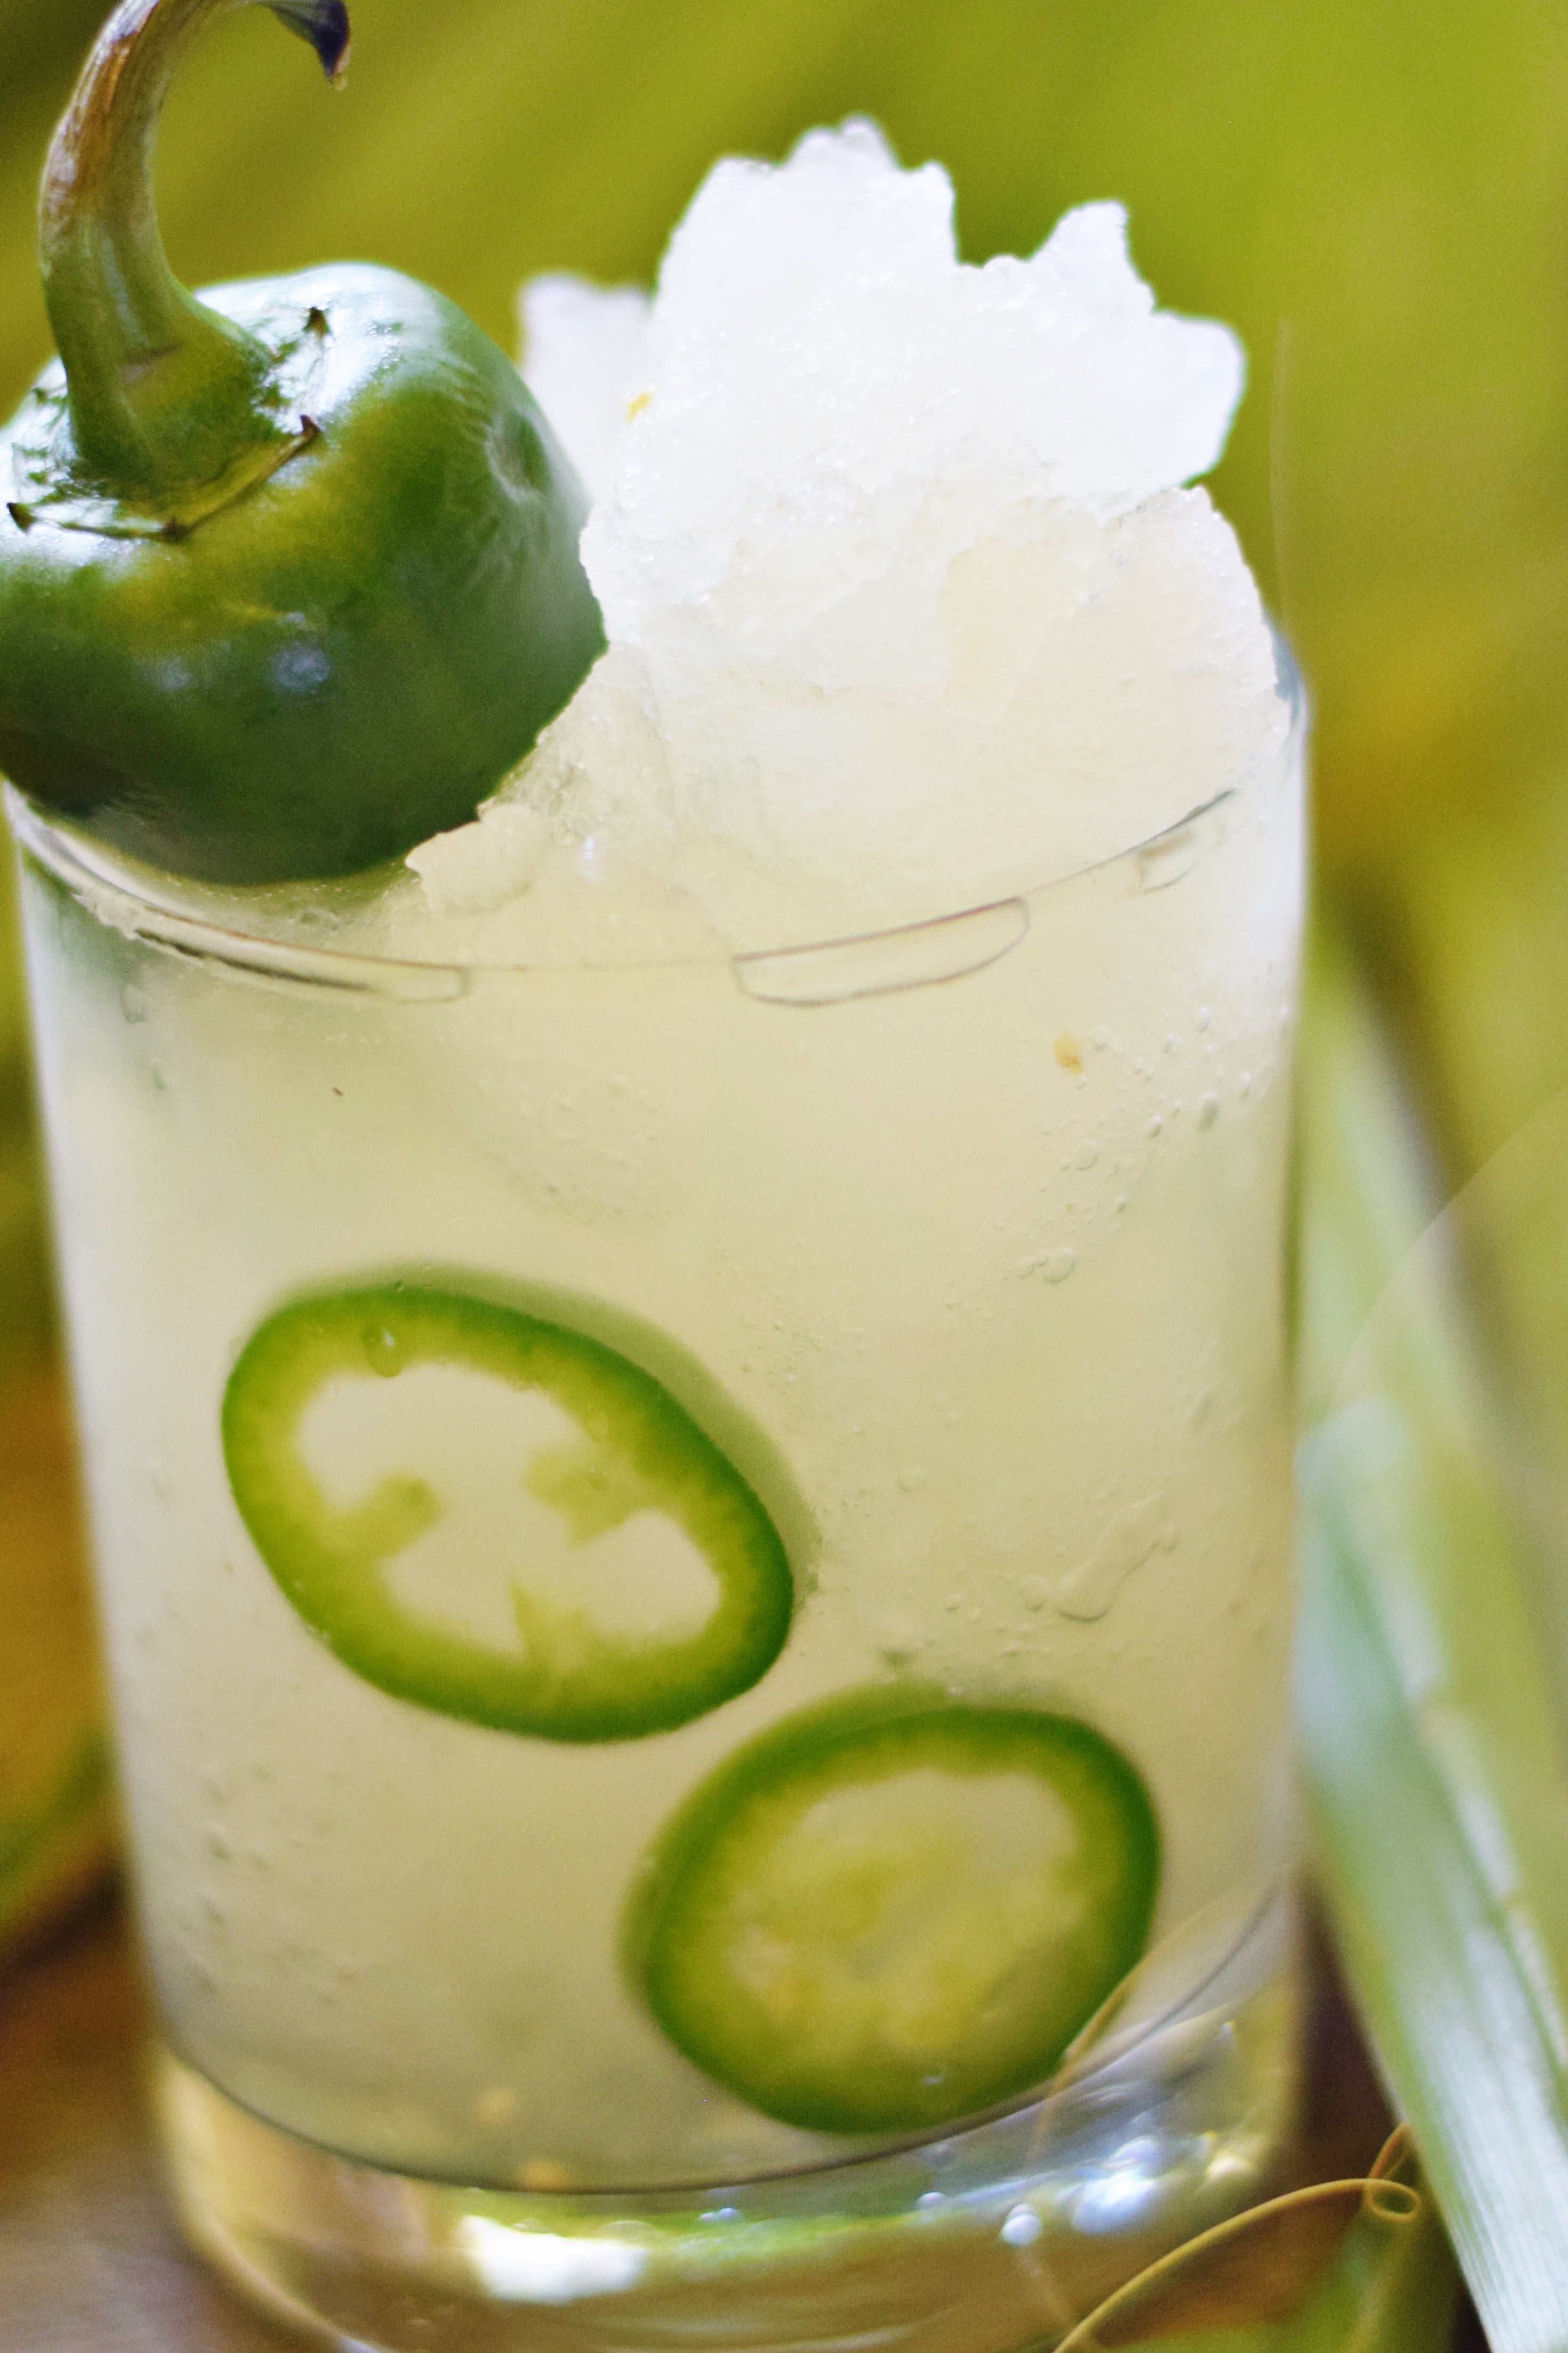 FROZEN JALAPENO LEMONADE - A refreshing frozen mocktail or cocktail that brings a sour punch of lemonade with a spicy jalapeño aftertaste! | Jalapeño Lemonade - Lemonade Cocktail - Lemonade Mocktail - Jalapeño Lemonade Cocktail - Summer Cocktail - Easy Cocktail - #cocktail #summer #recipe